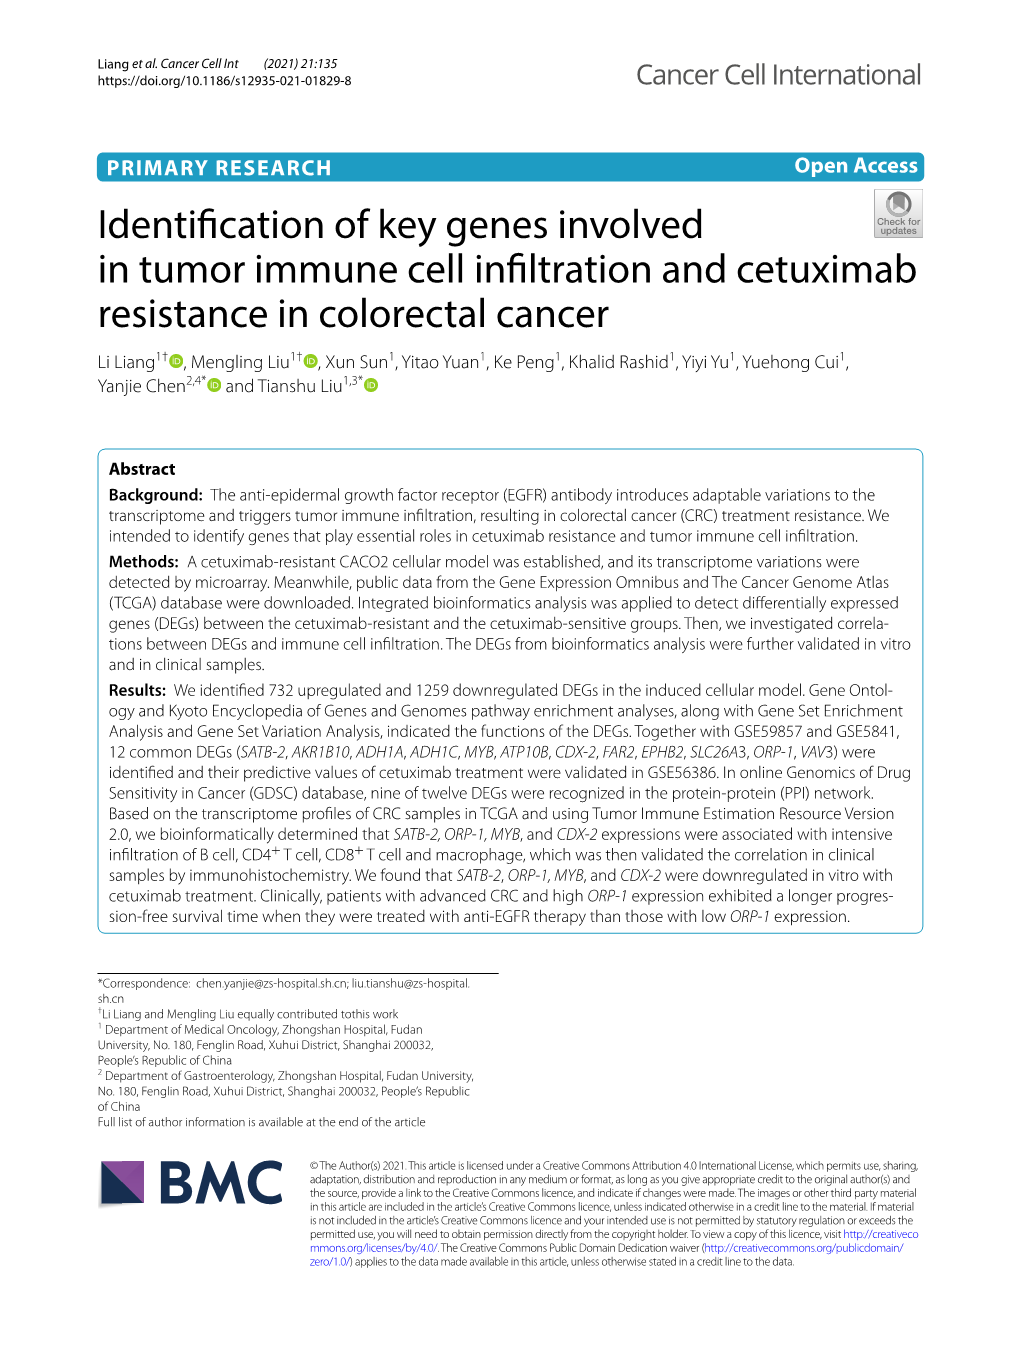 Identification of Key Genes Involved in Tumor Immune Cell Infiltration And